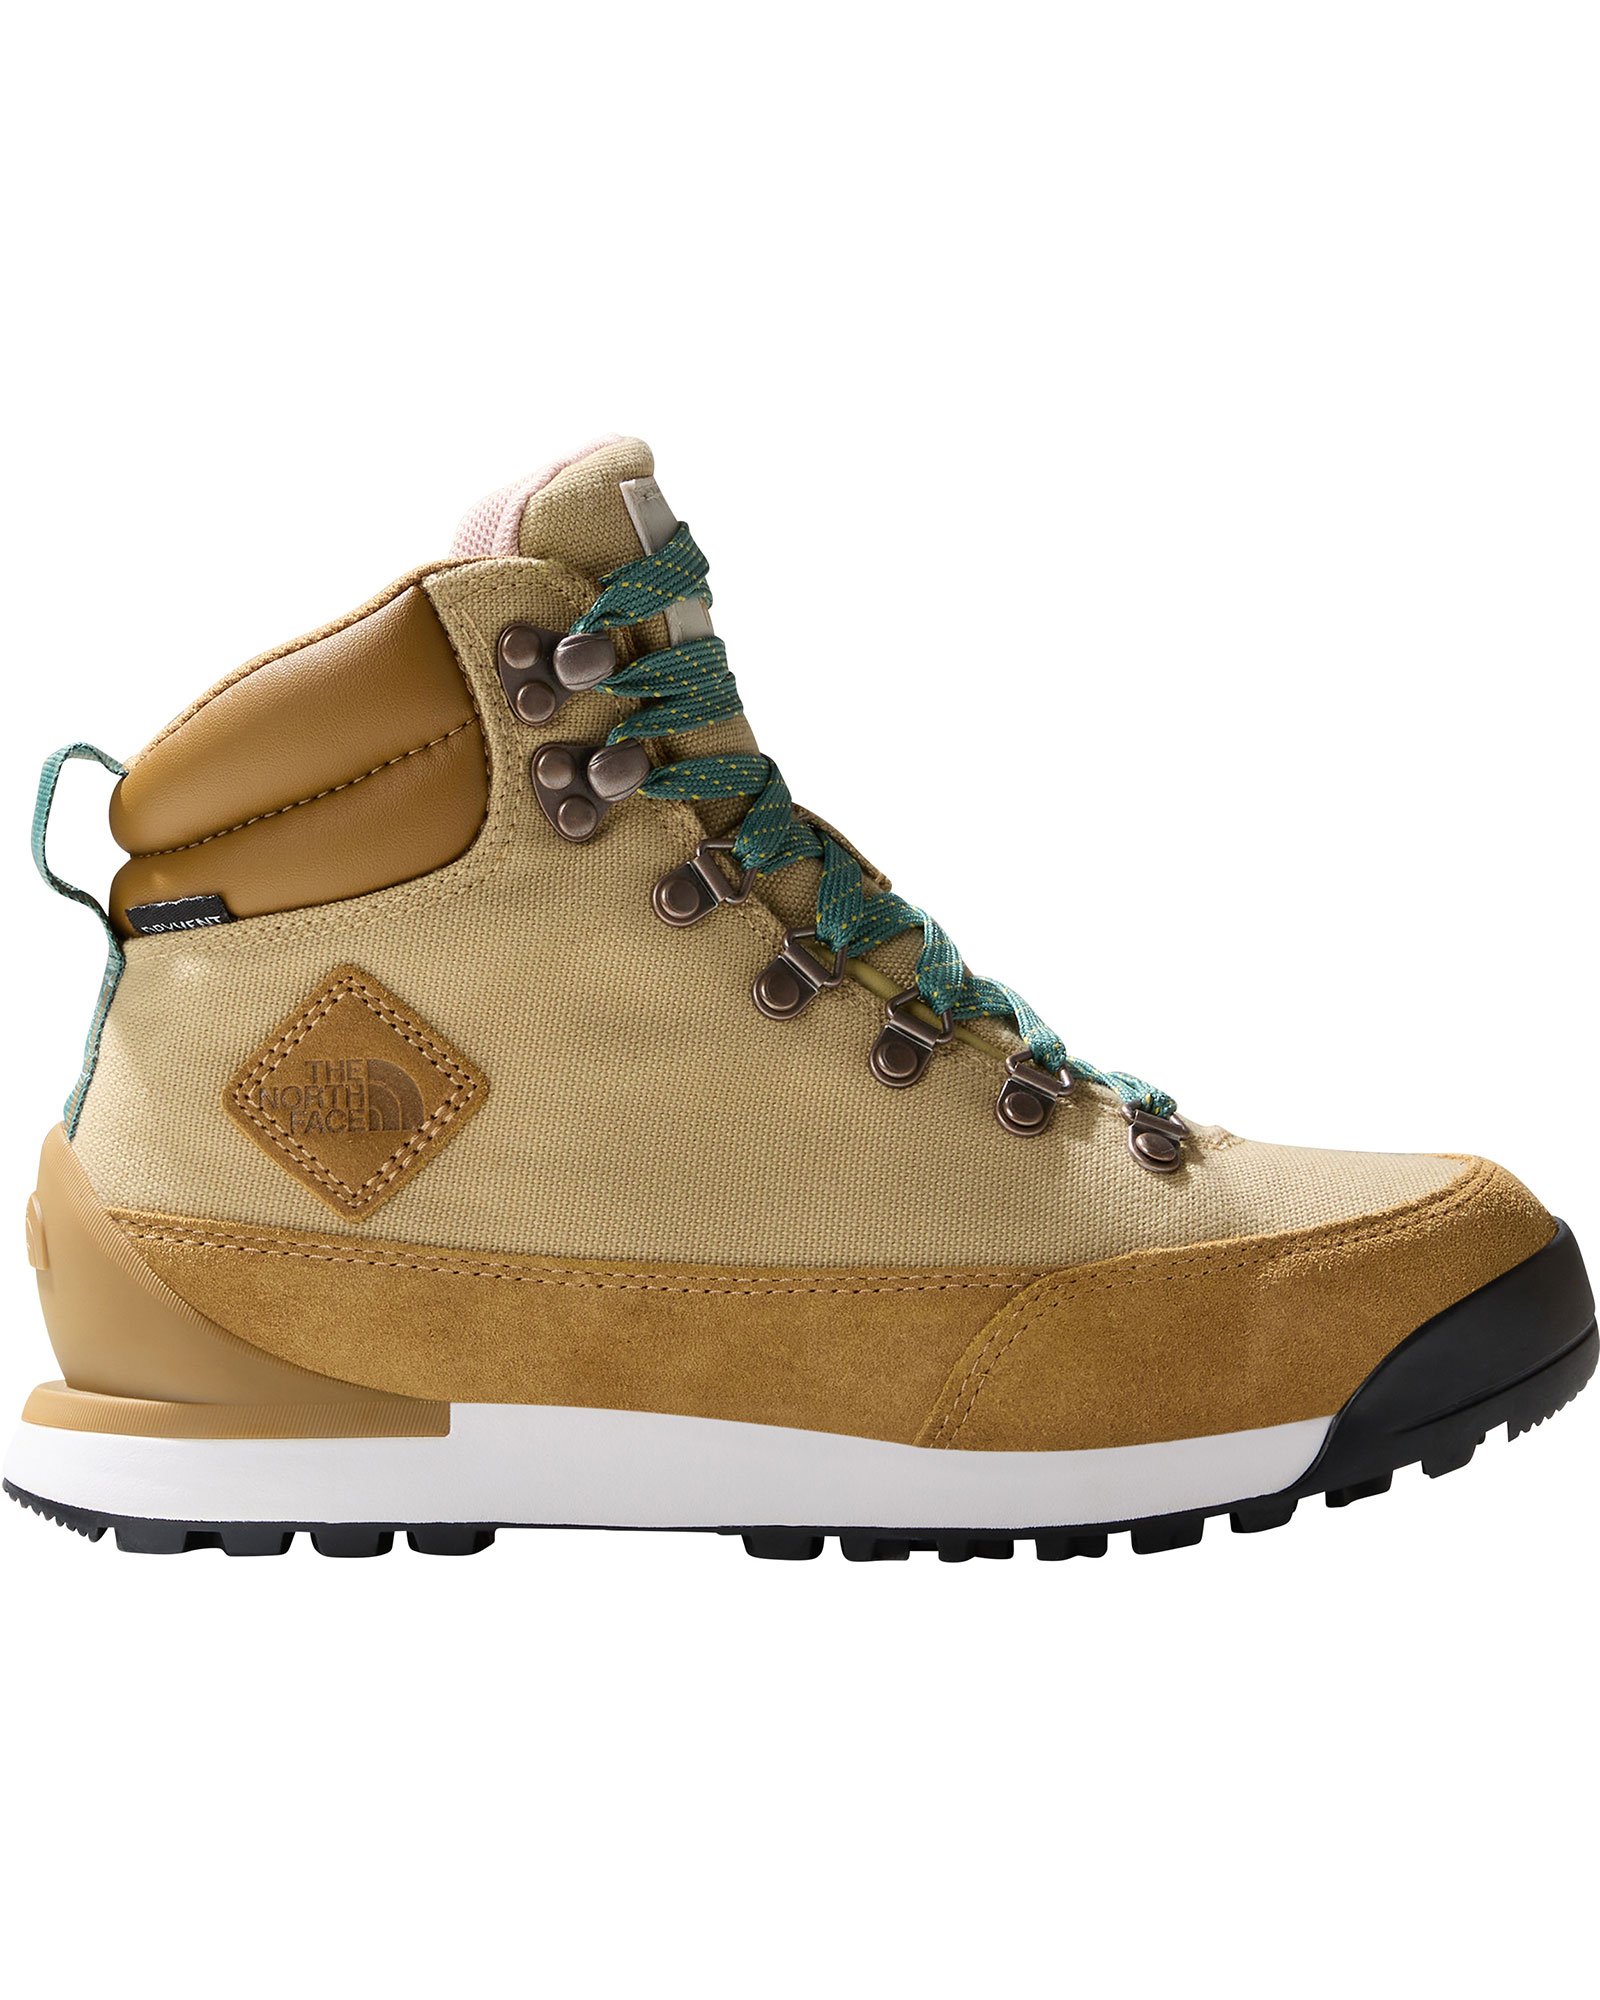 The North Face Back to Berkeley IV Textile Waterproof Women’s Boots - Khaki Stone/Utility Brown UK 6